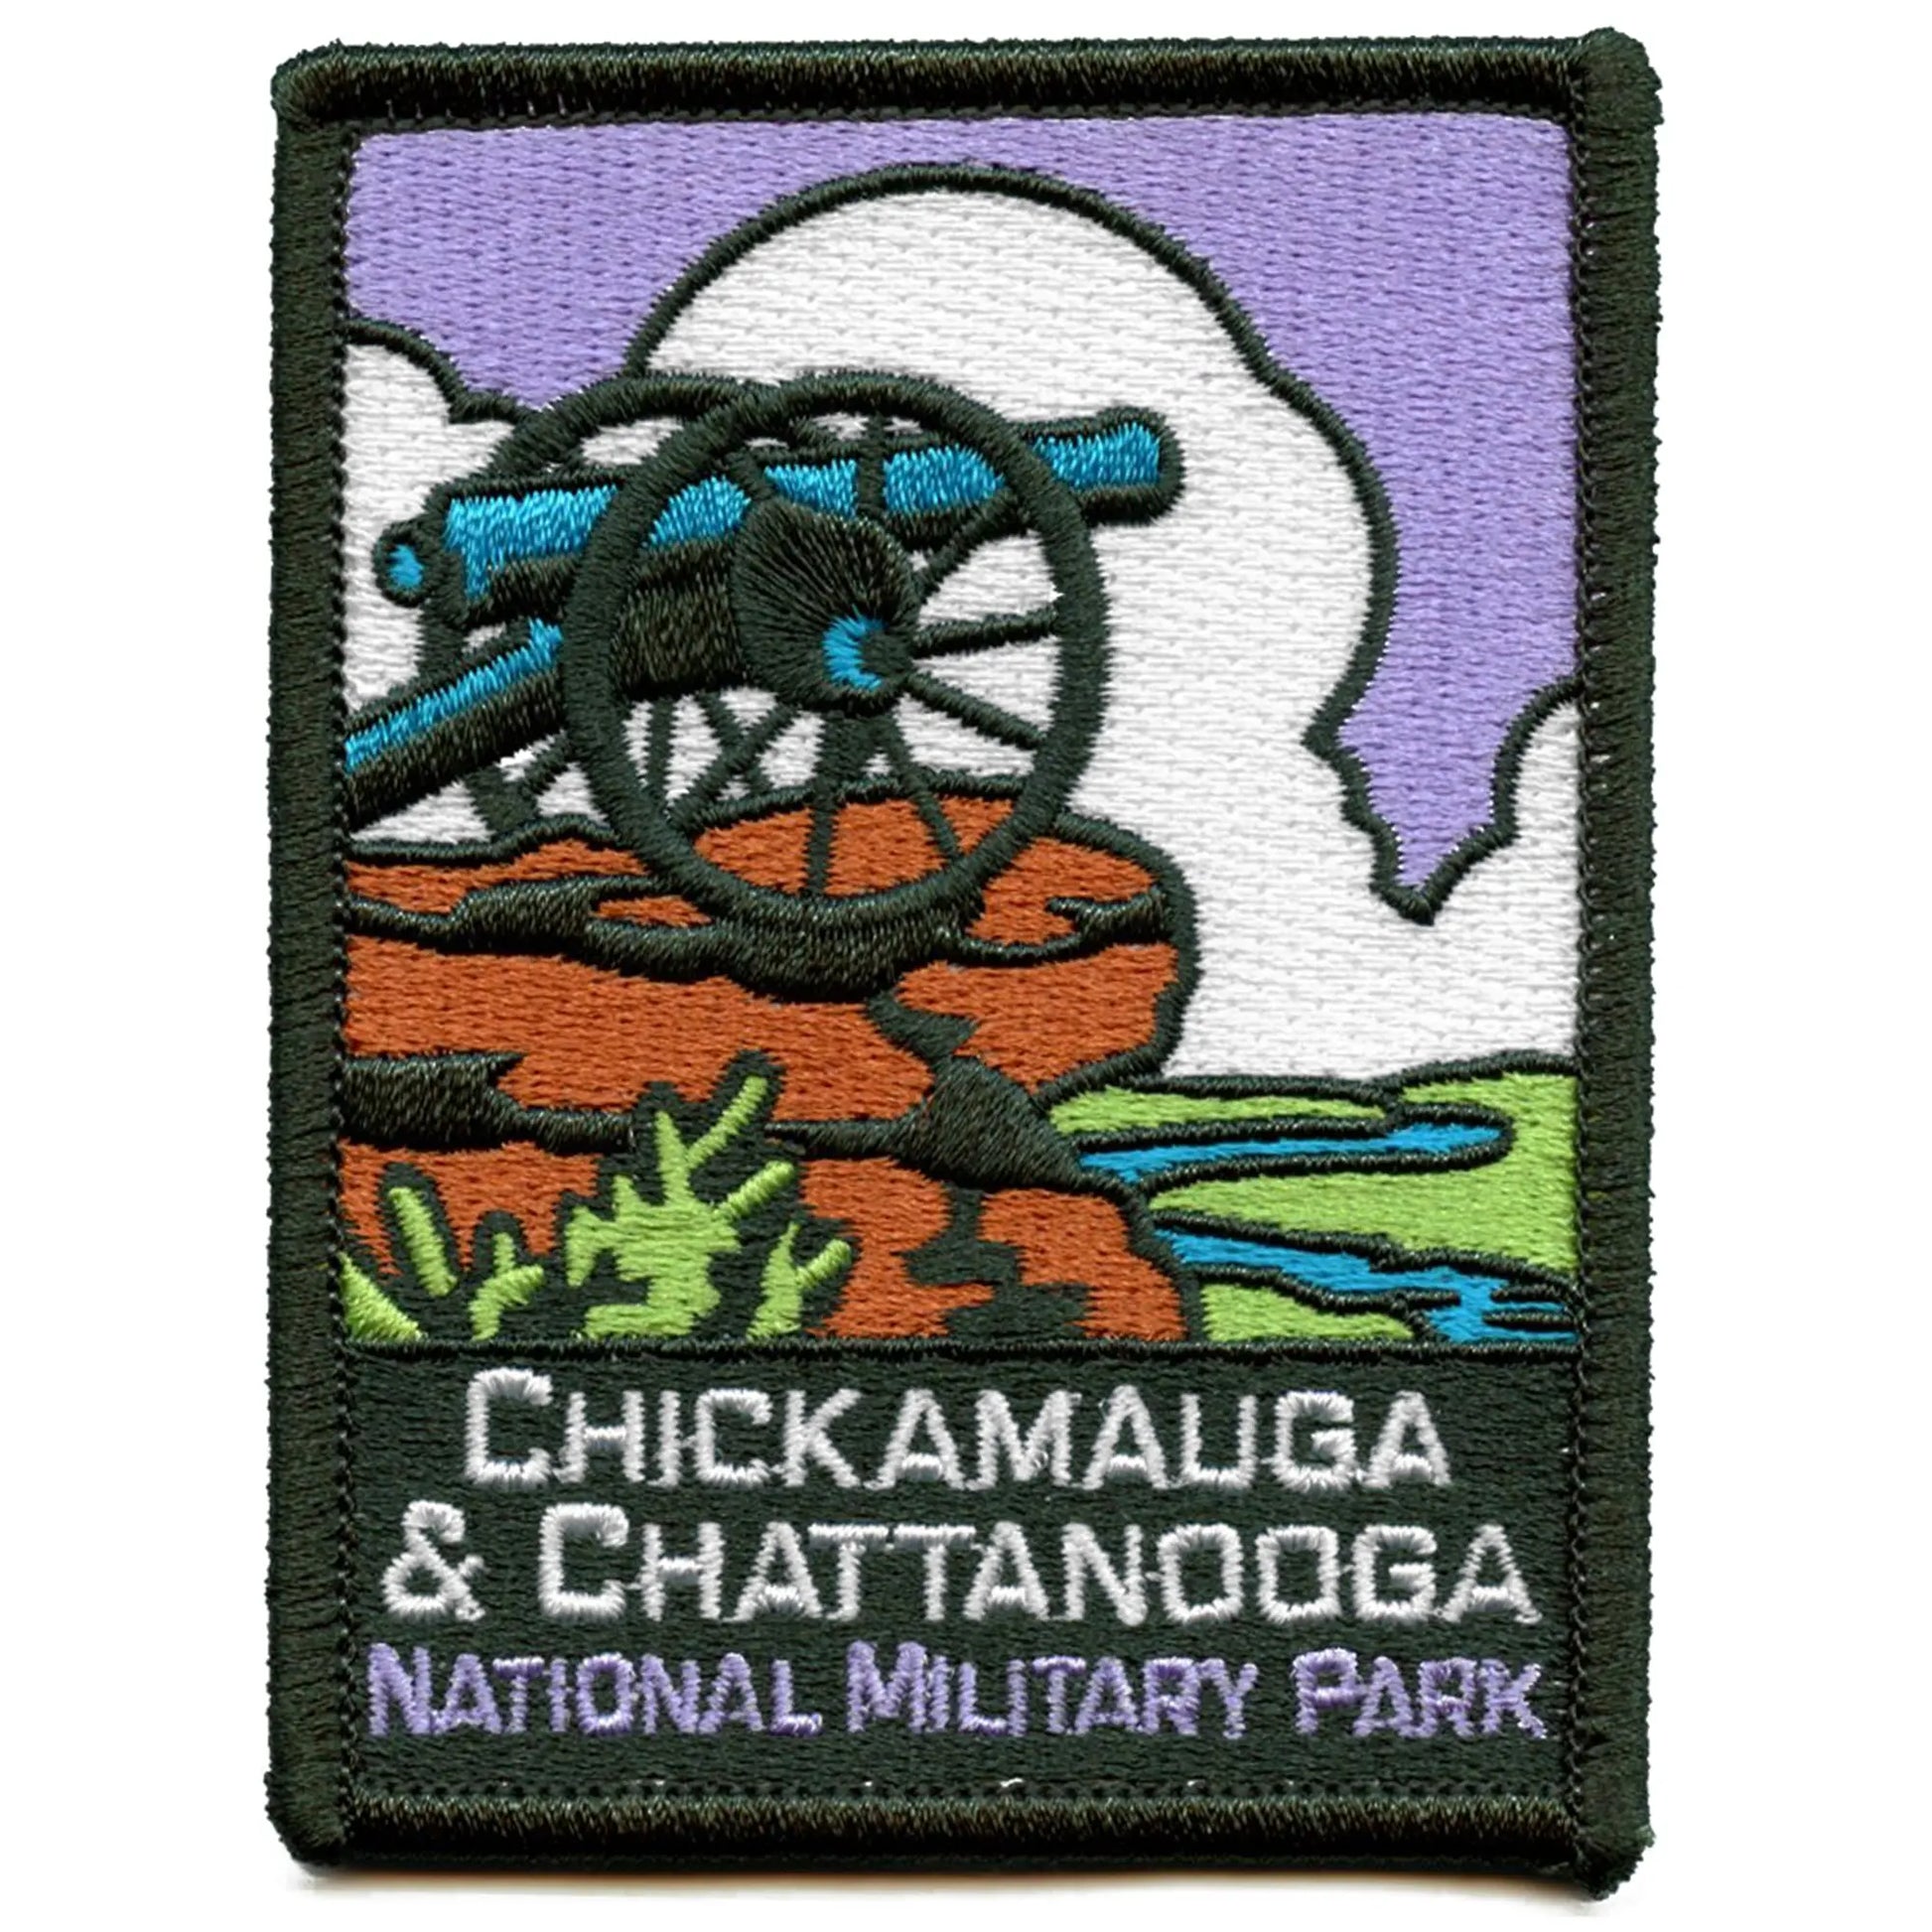 Chickamauga And Chattanooga National Military Park Patch Civil War Travel Embroidered Iron On